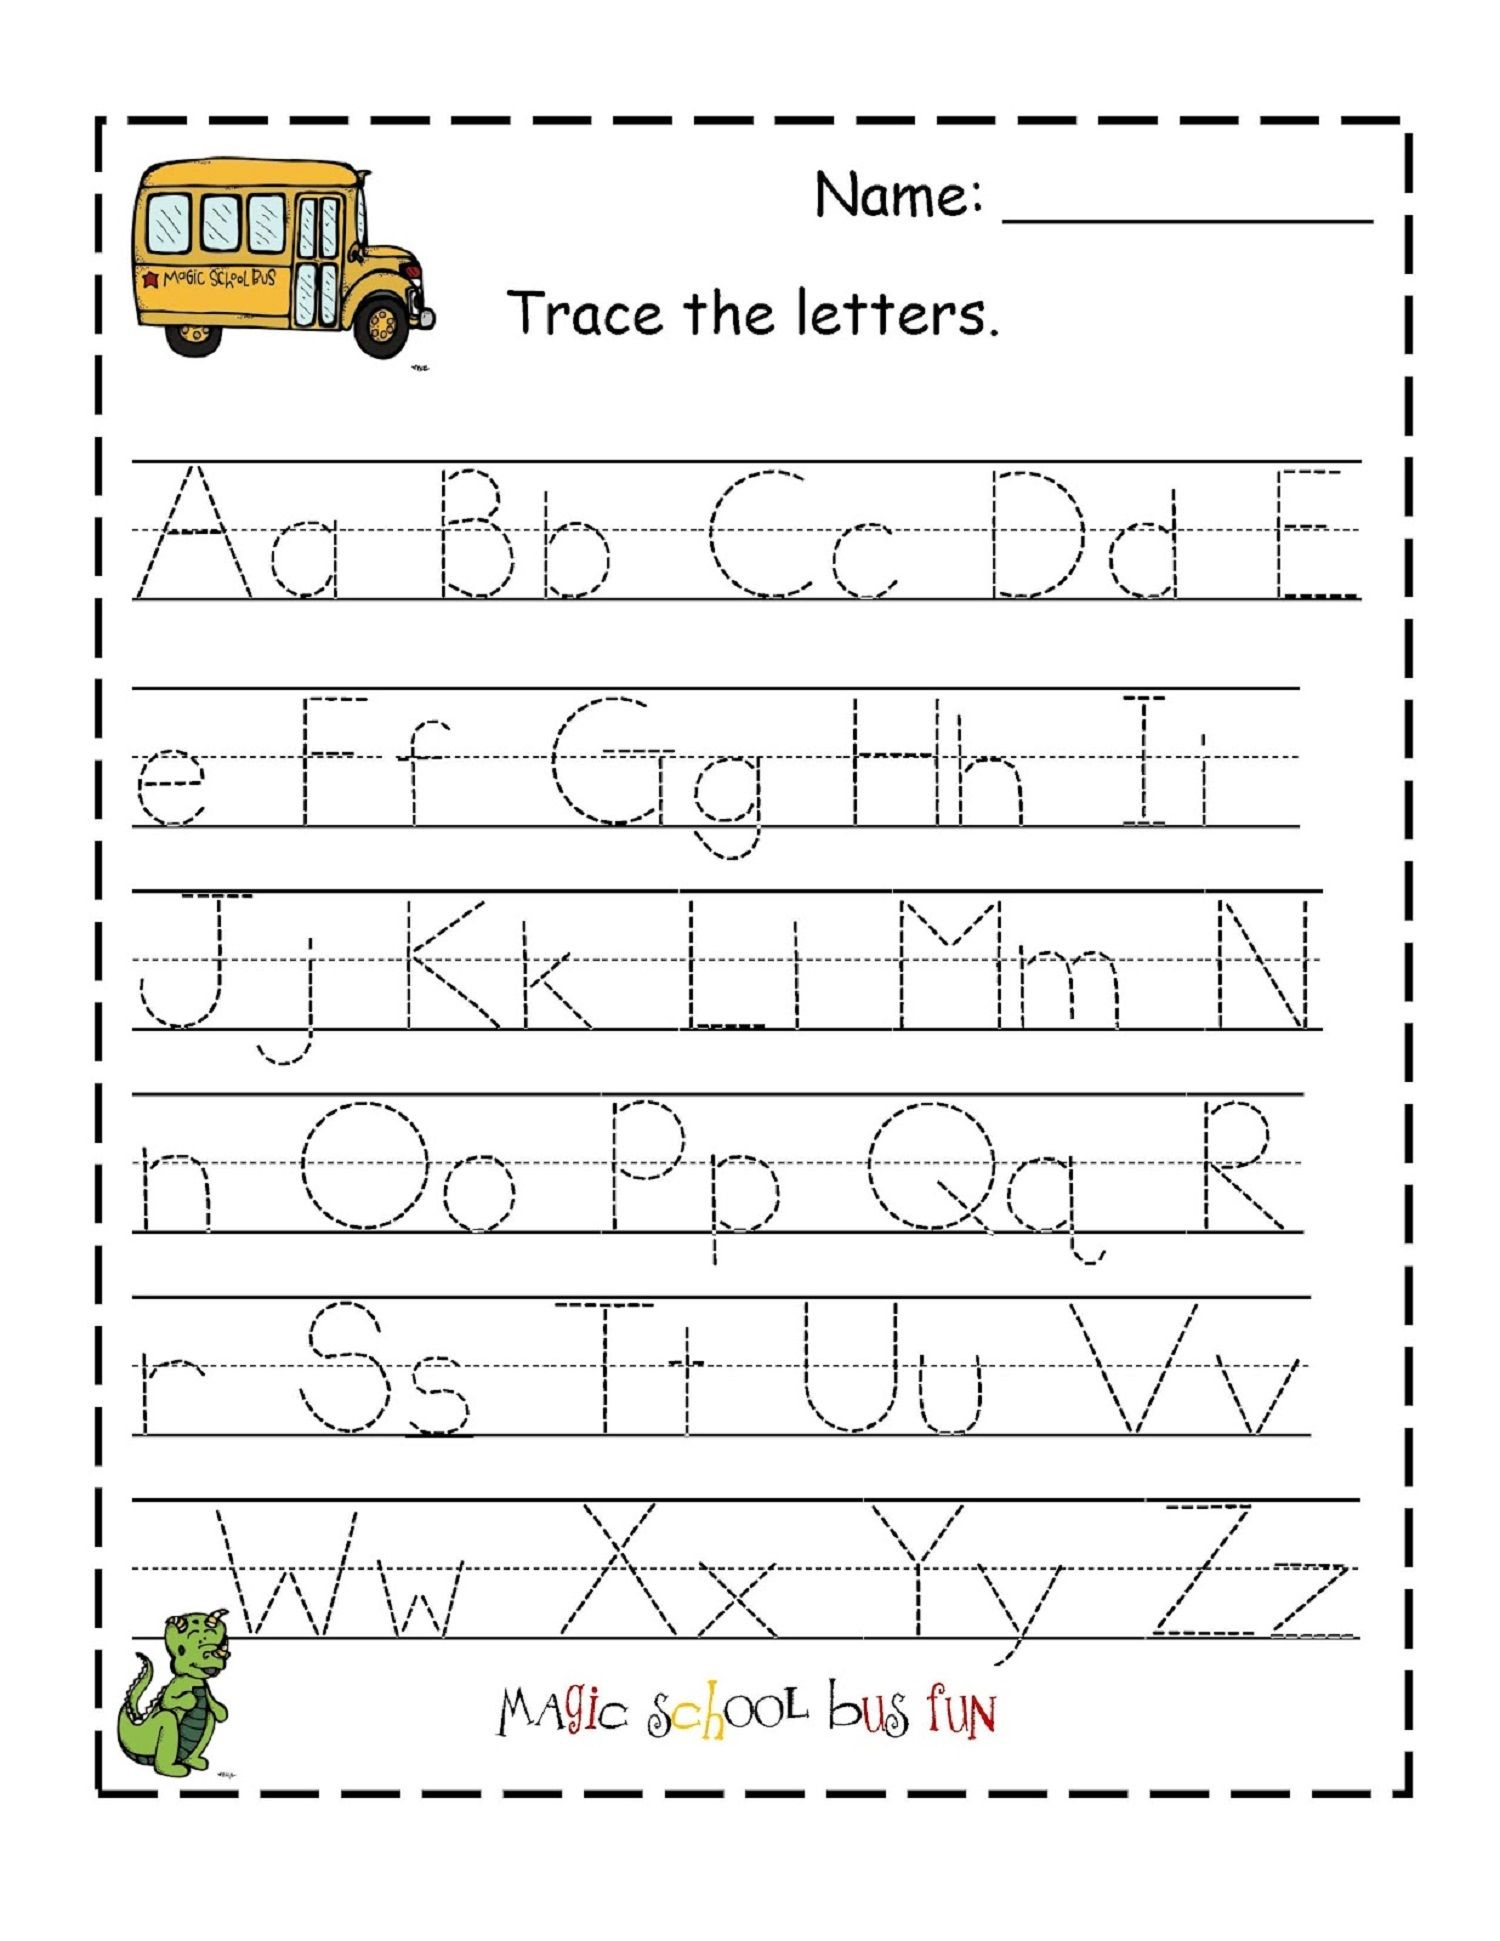 Traceable Alphabet For Learning Exercise | Letter Tracing throughout Tracing The Letter I Worksheets For Preschool